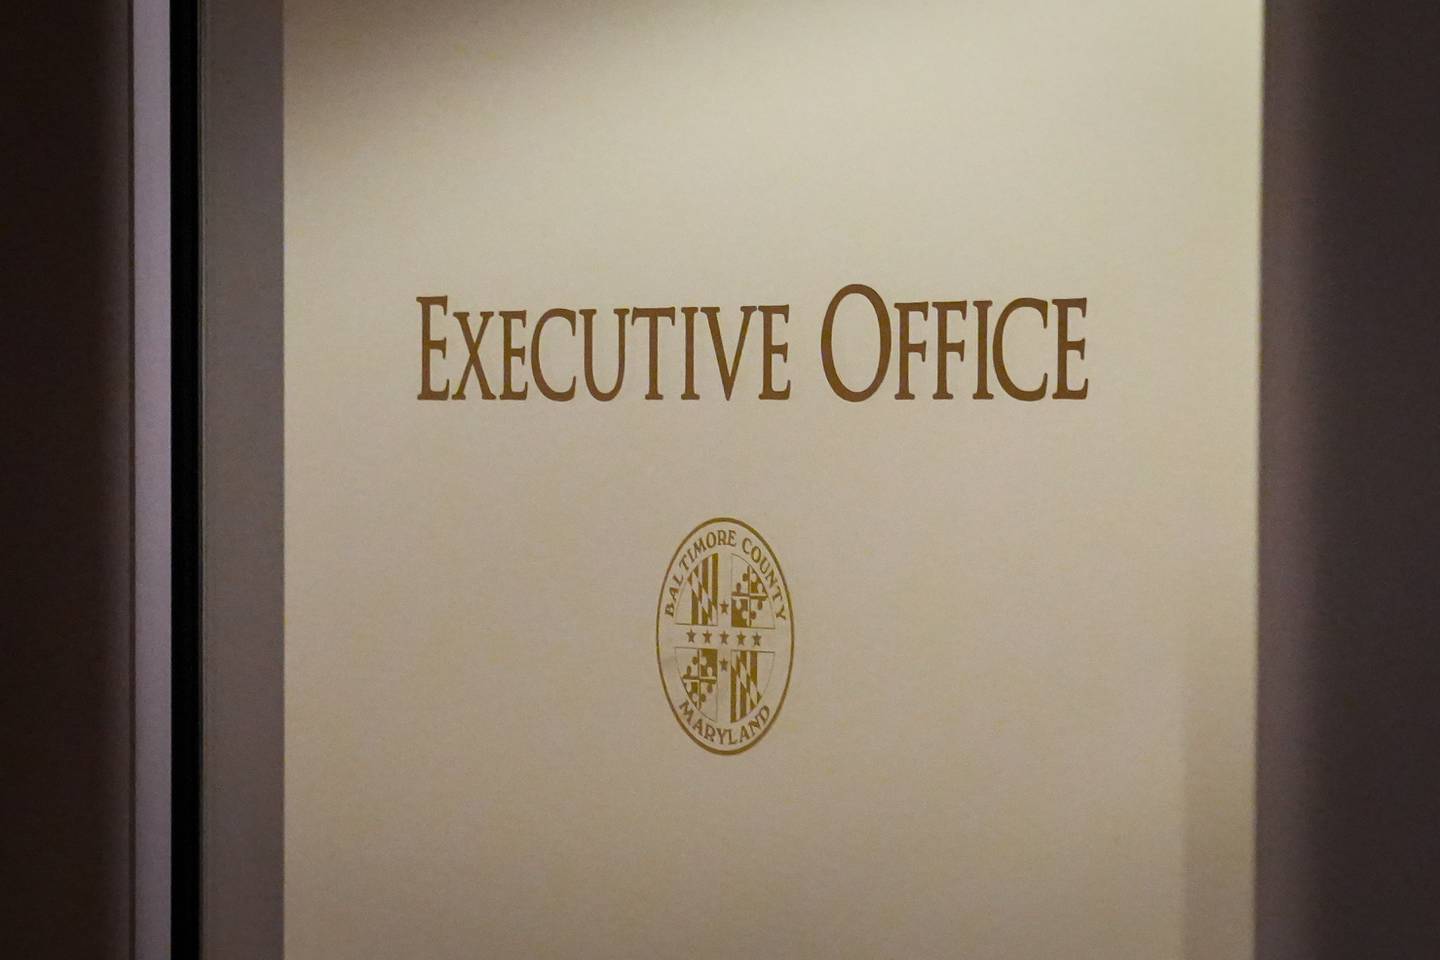 6/16/22—A decal reading “Executive Office” is on the county executive’s door inside the historic Baltimore County Courthouse in Towson, the center of county government.